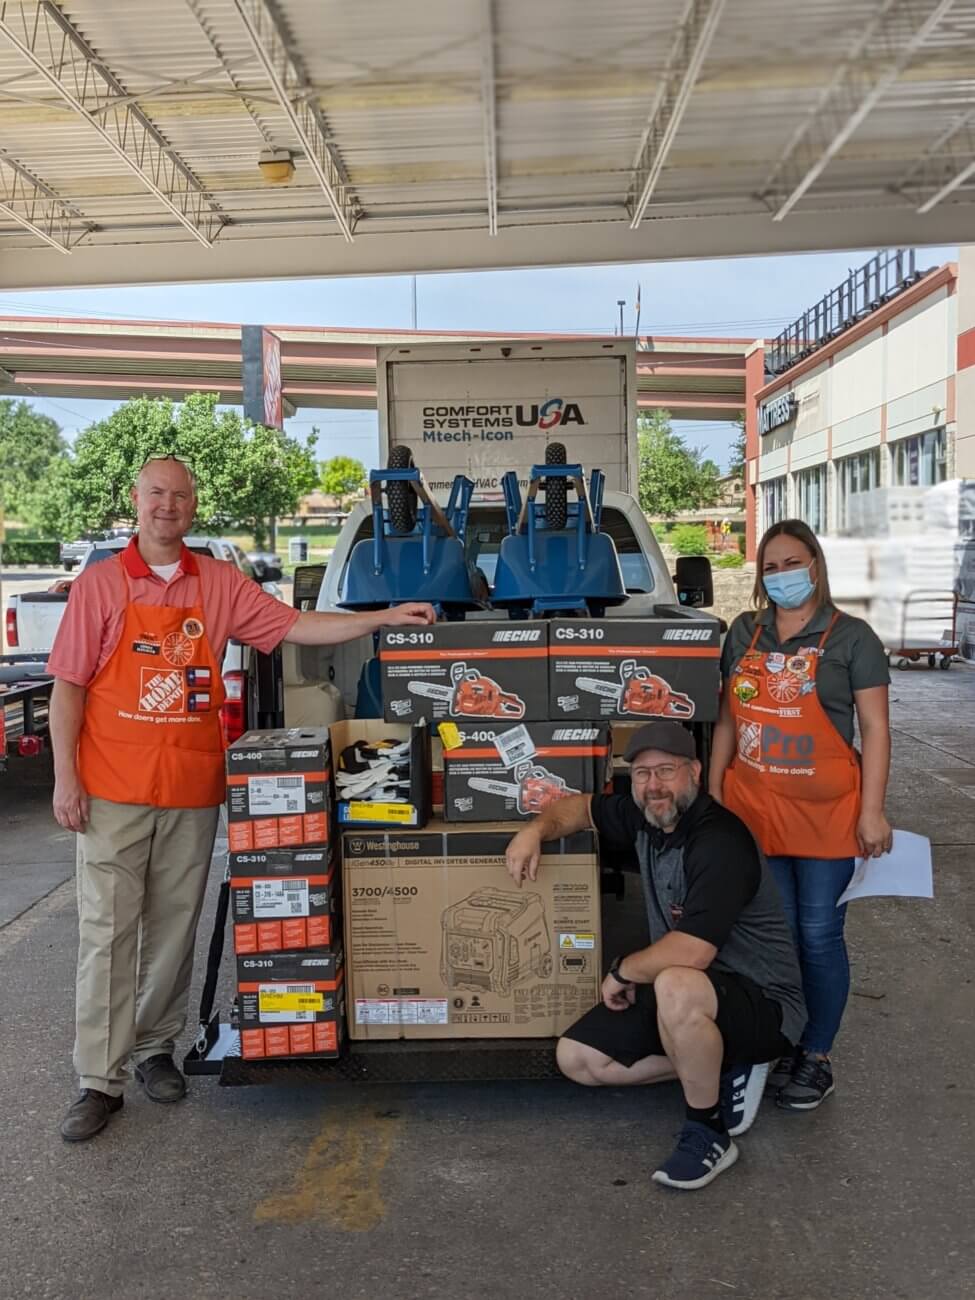 Home depot staff poses for a photo in front of donations given to the Round Rock community impacted by the March 21 tornado